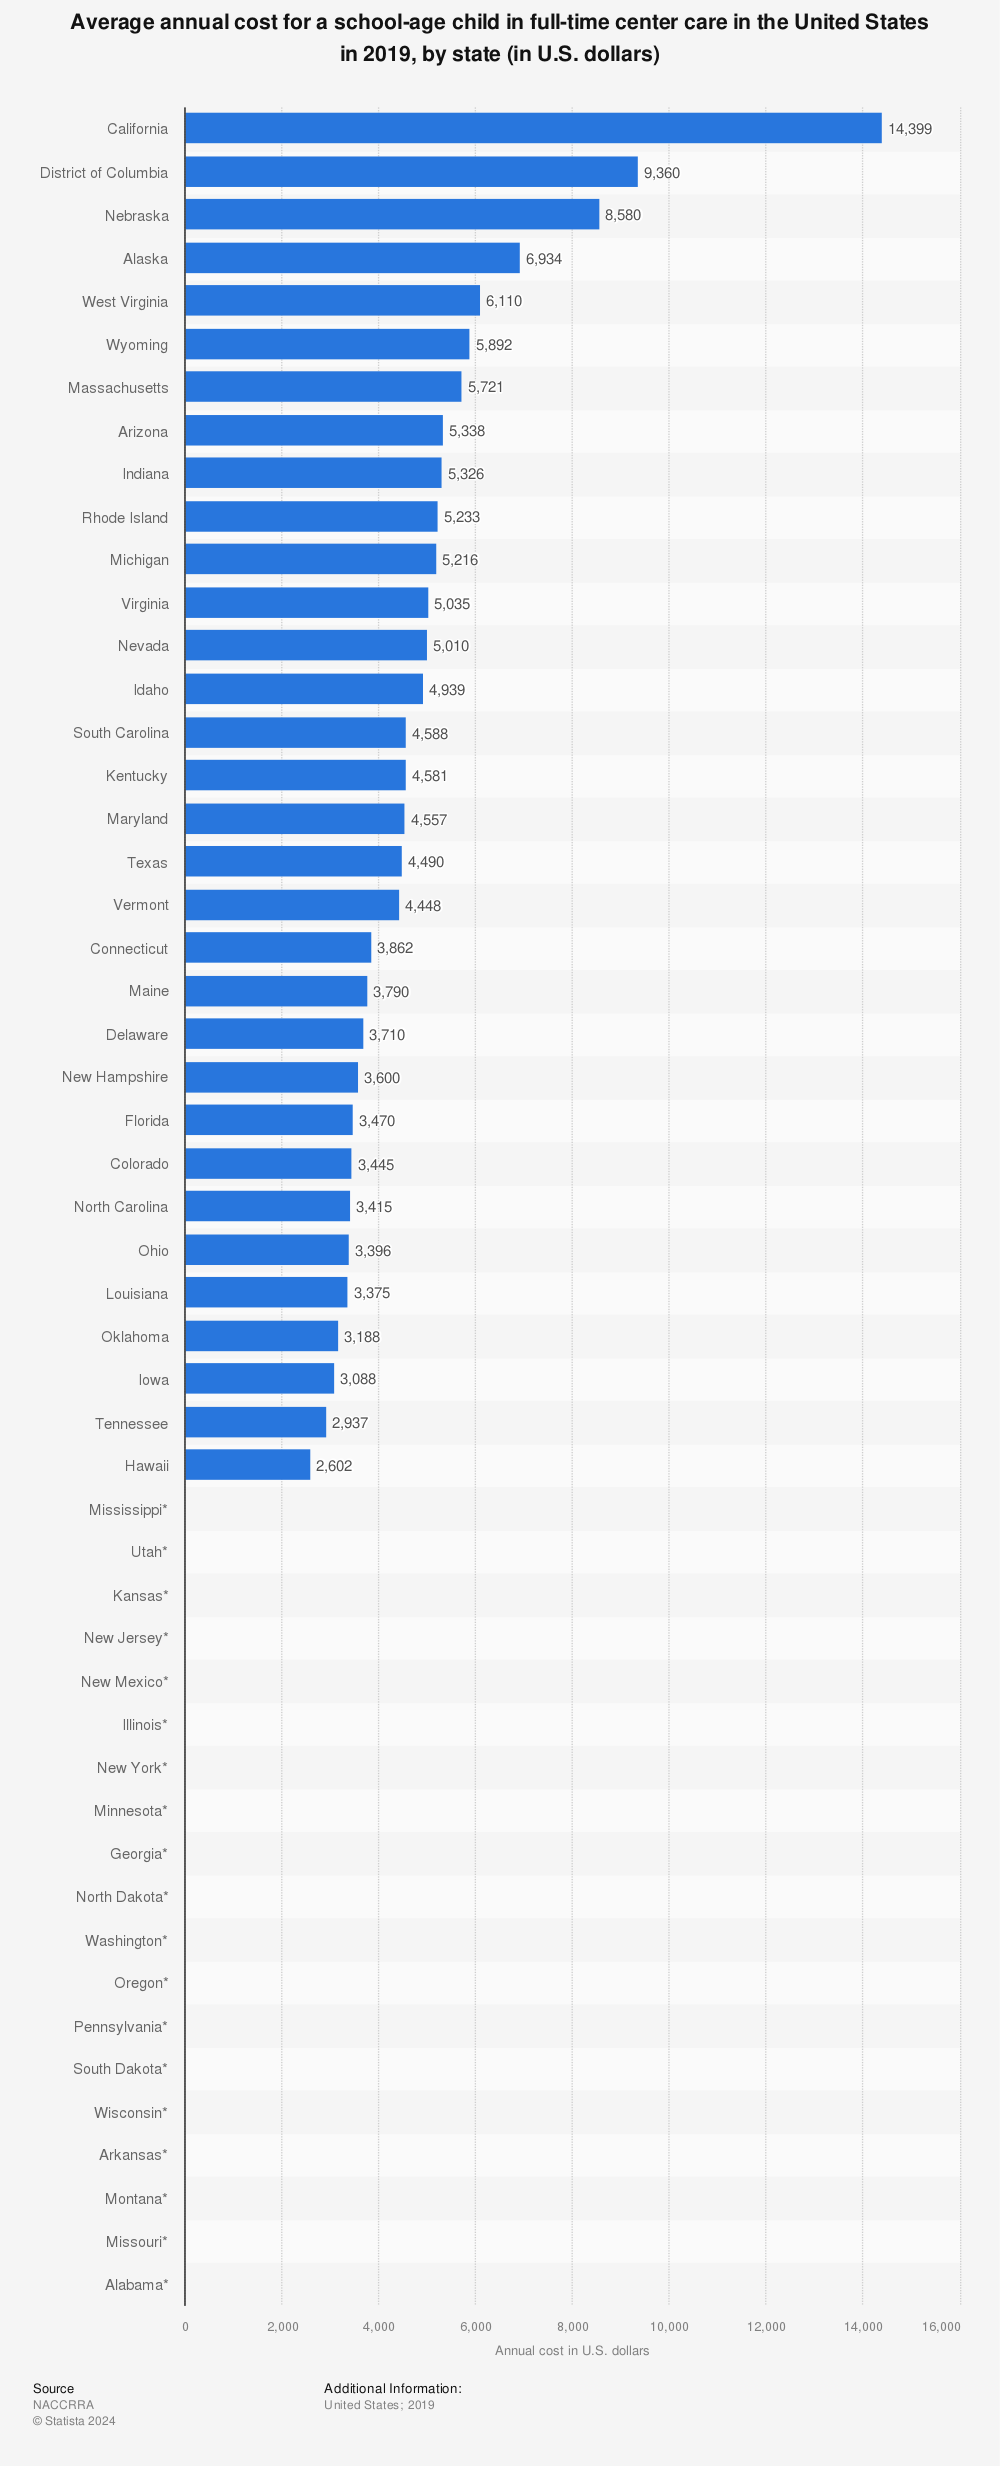 Statistic: Average annual cost for a school-age child in full-time center care in the United States in 2019, by state (in U.S. dollars) | Statista